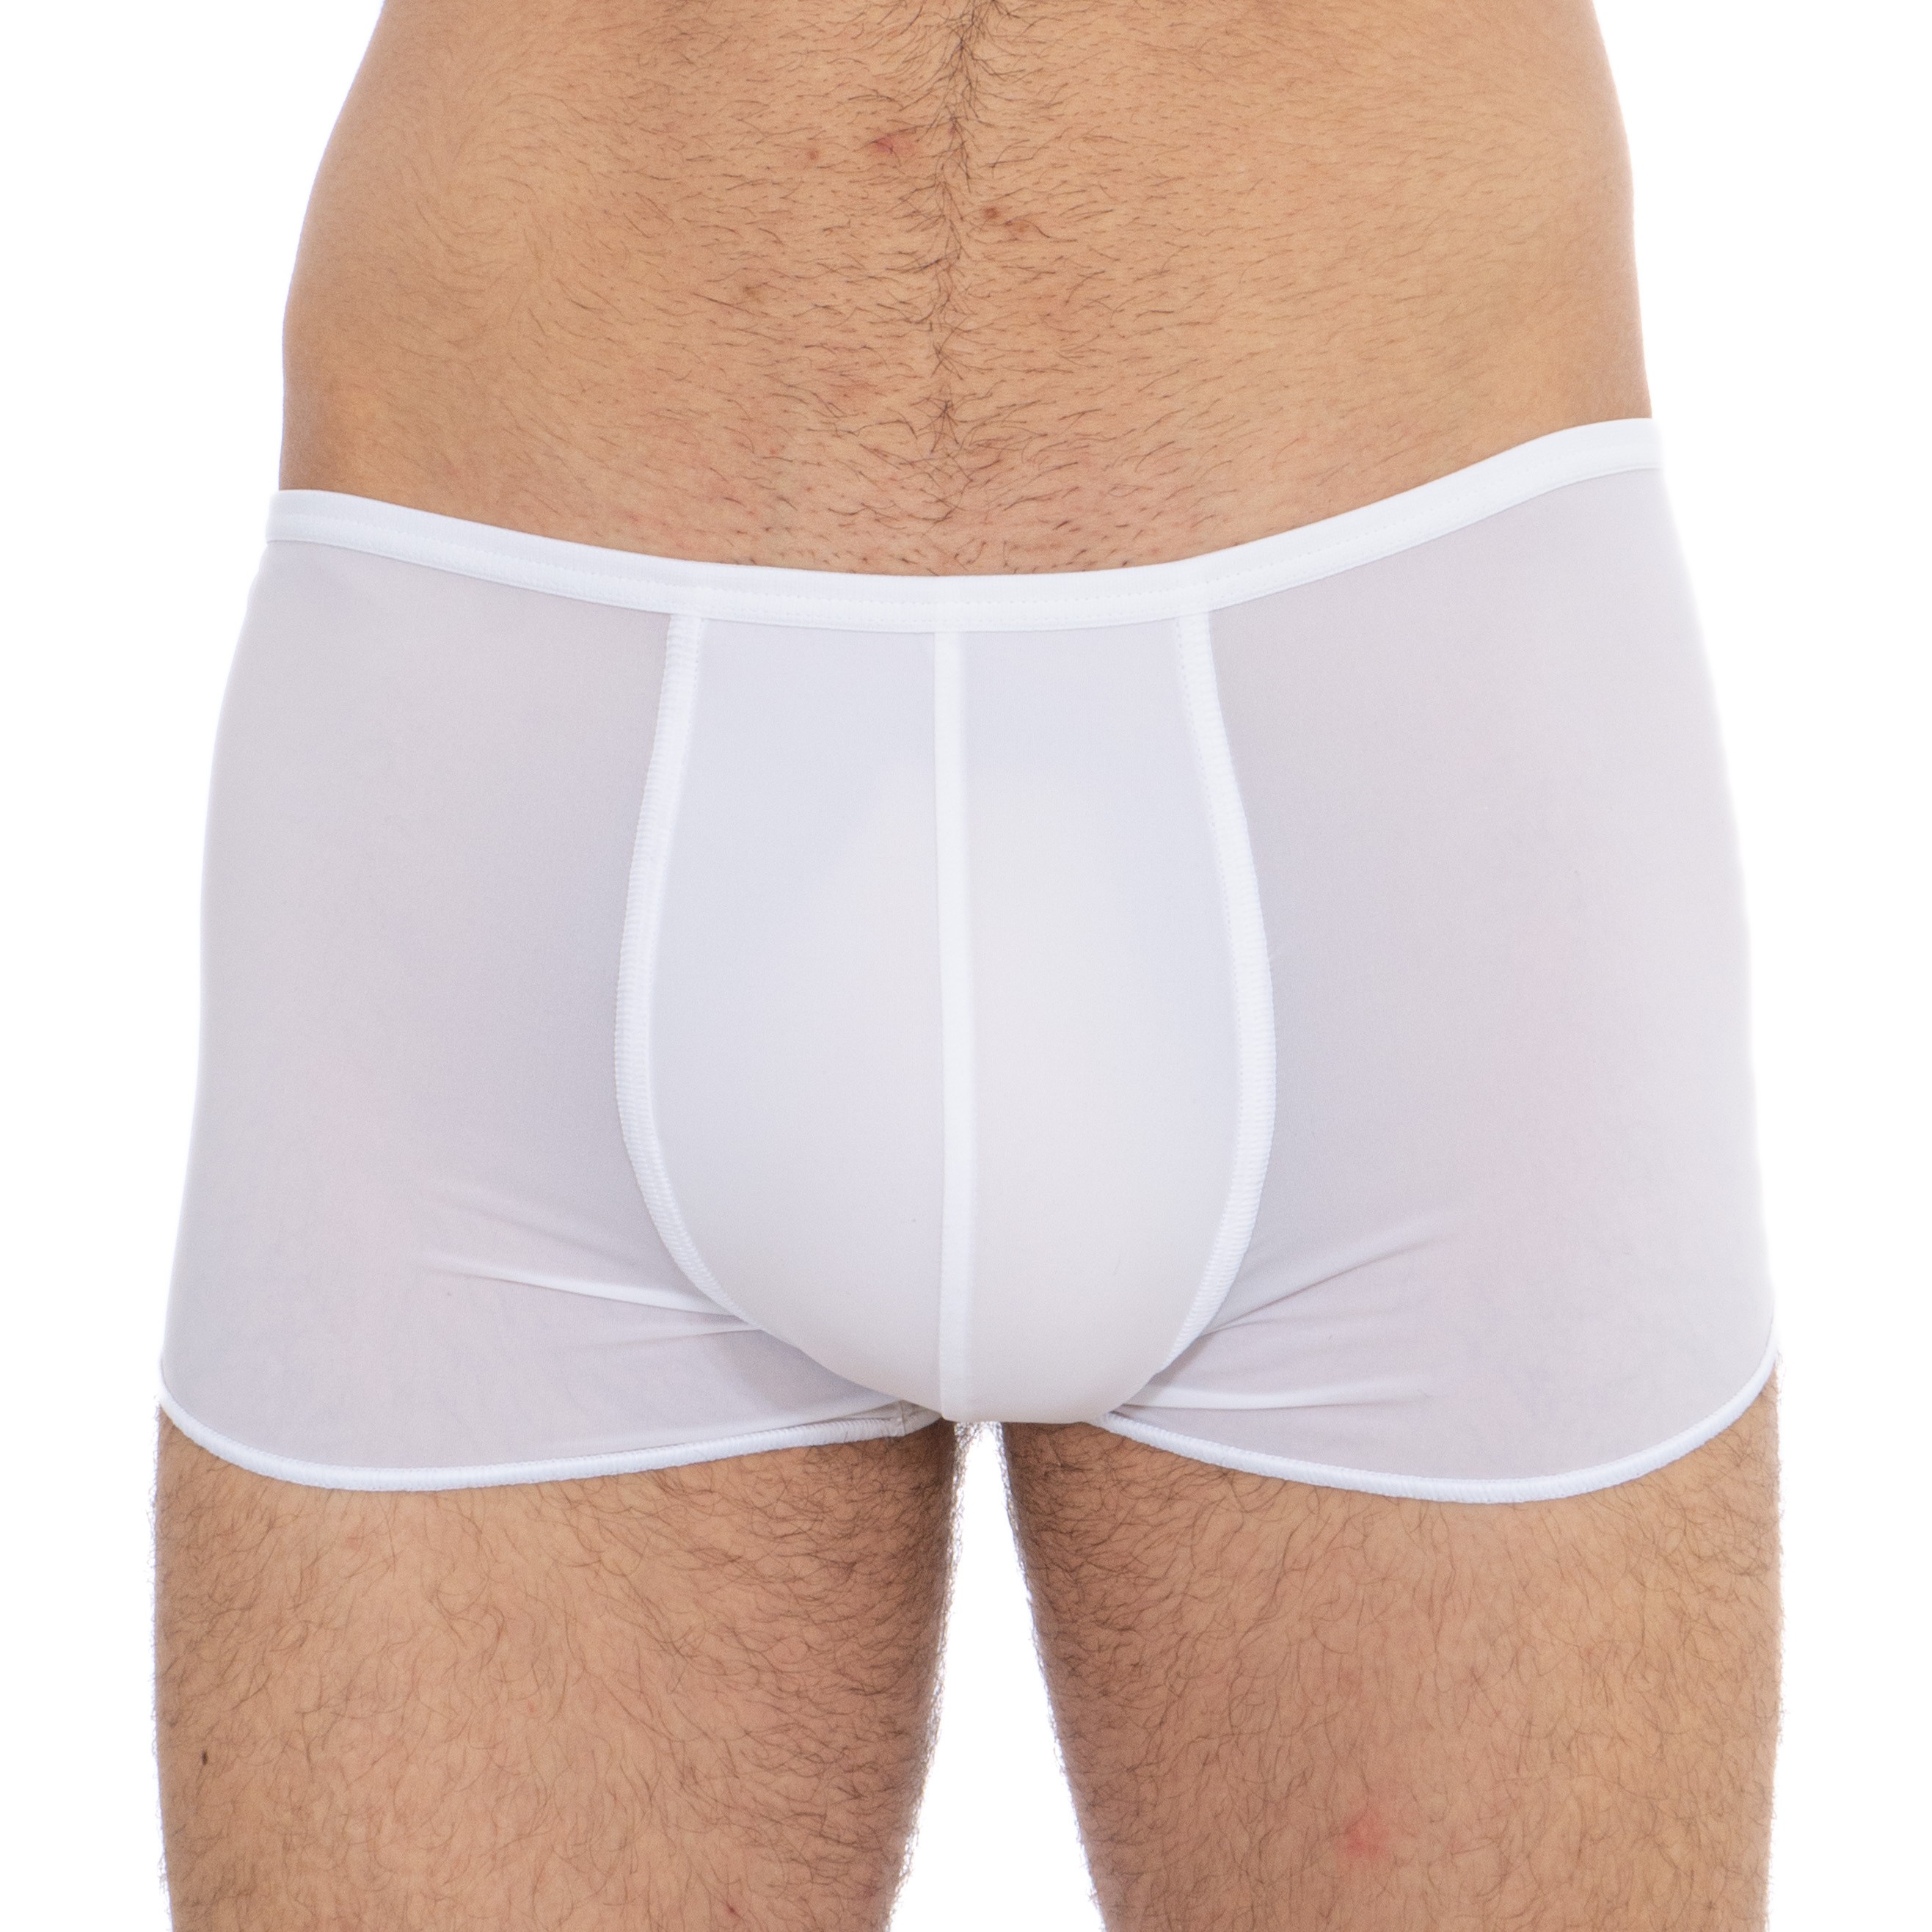 Boxer short Feathers - white: Boxers for man brand HOM for sale onl